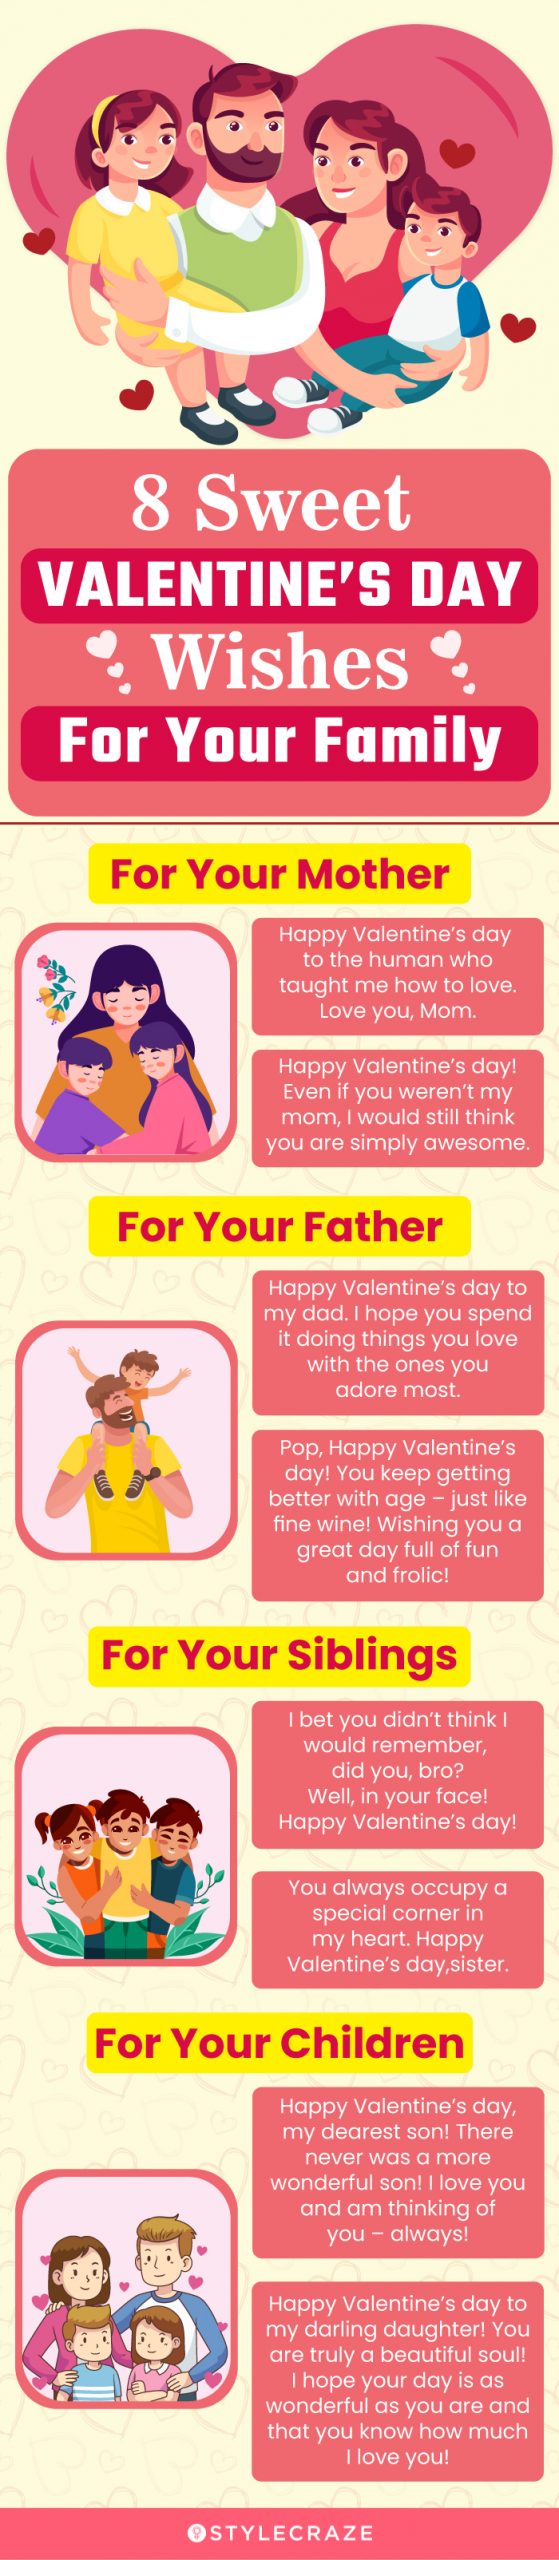 101 Valentine's Day Wishes For Family